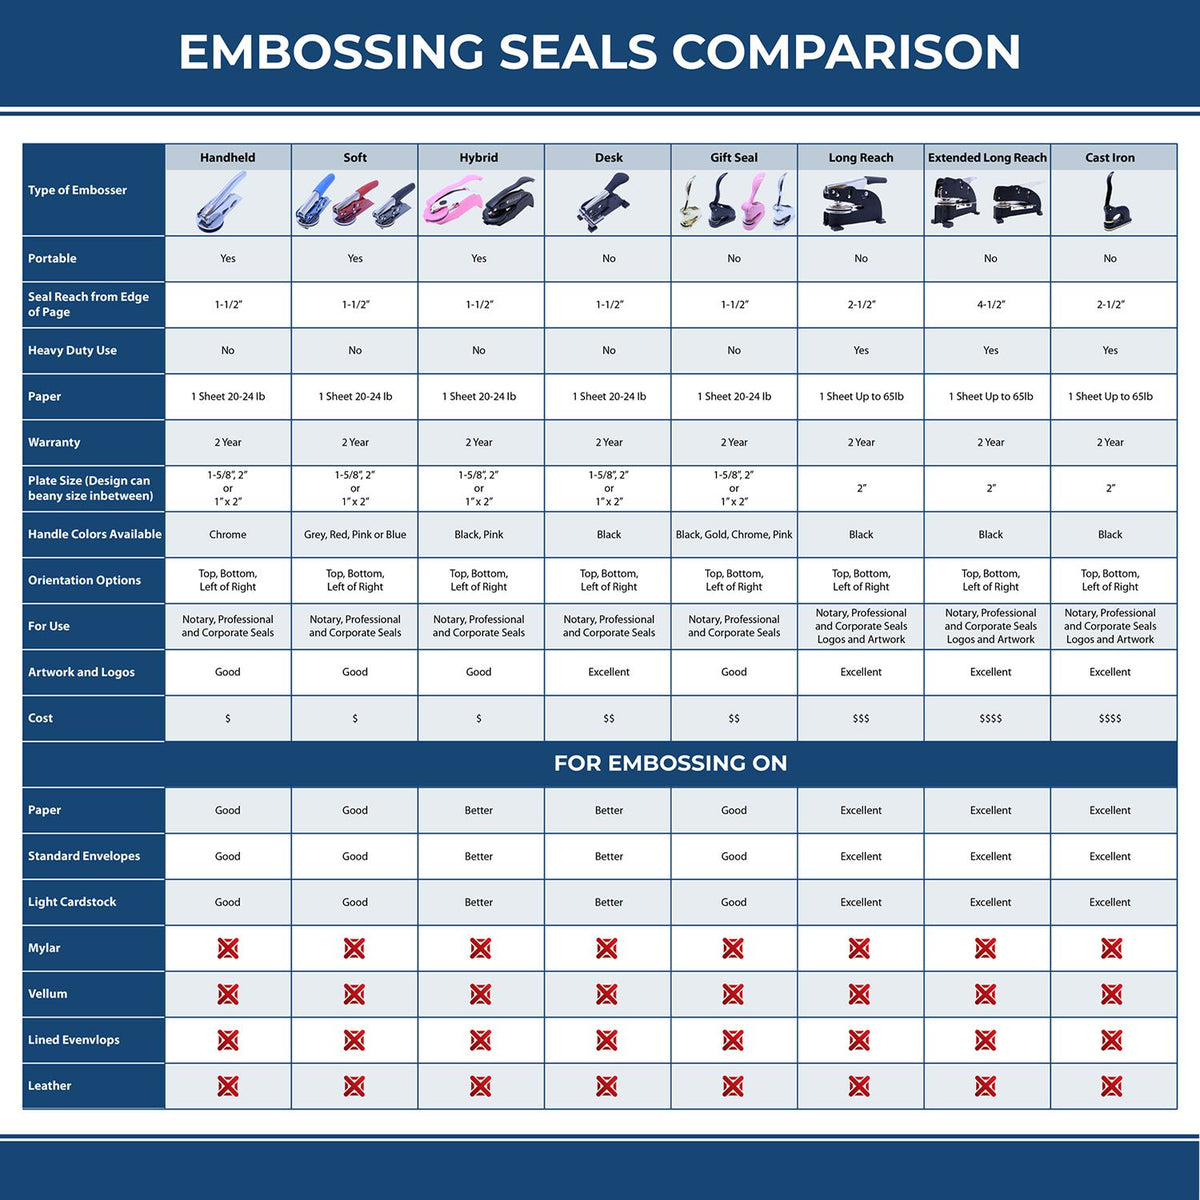 A comparison chart for the different types of mount models available for the Kansas Desk Surveyor Seal Embosser.